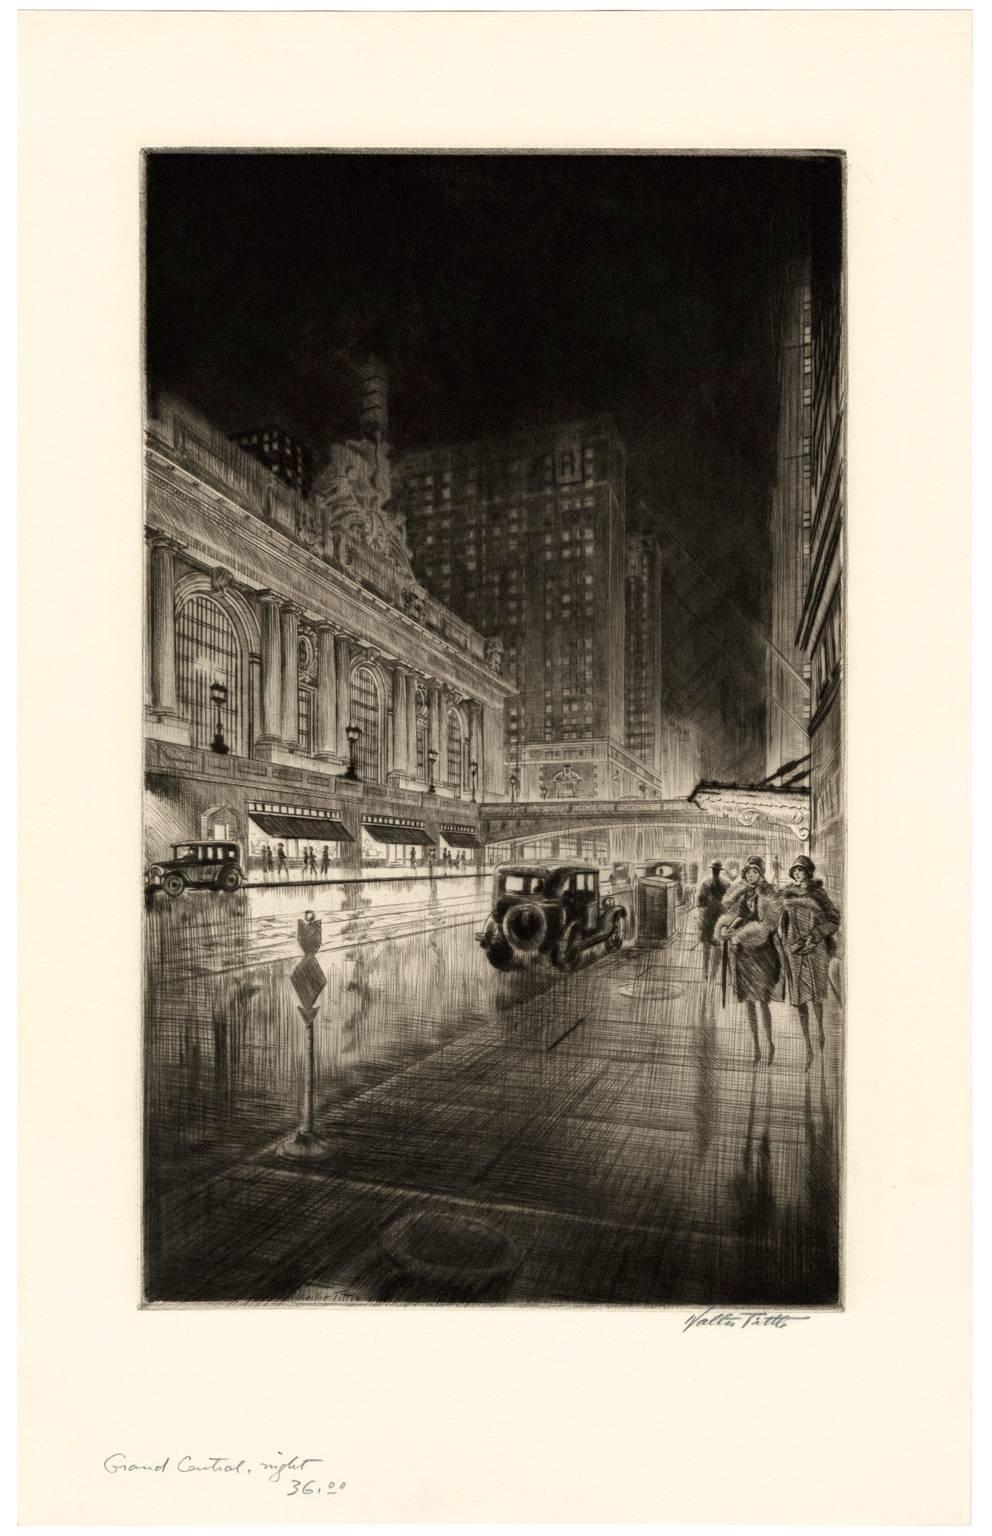 Grand Central, Night - Print by Walter Tittle